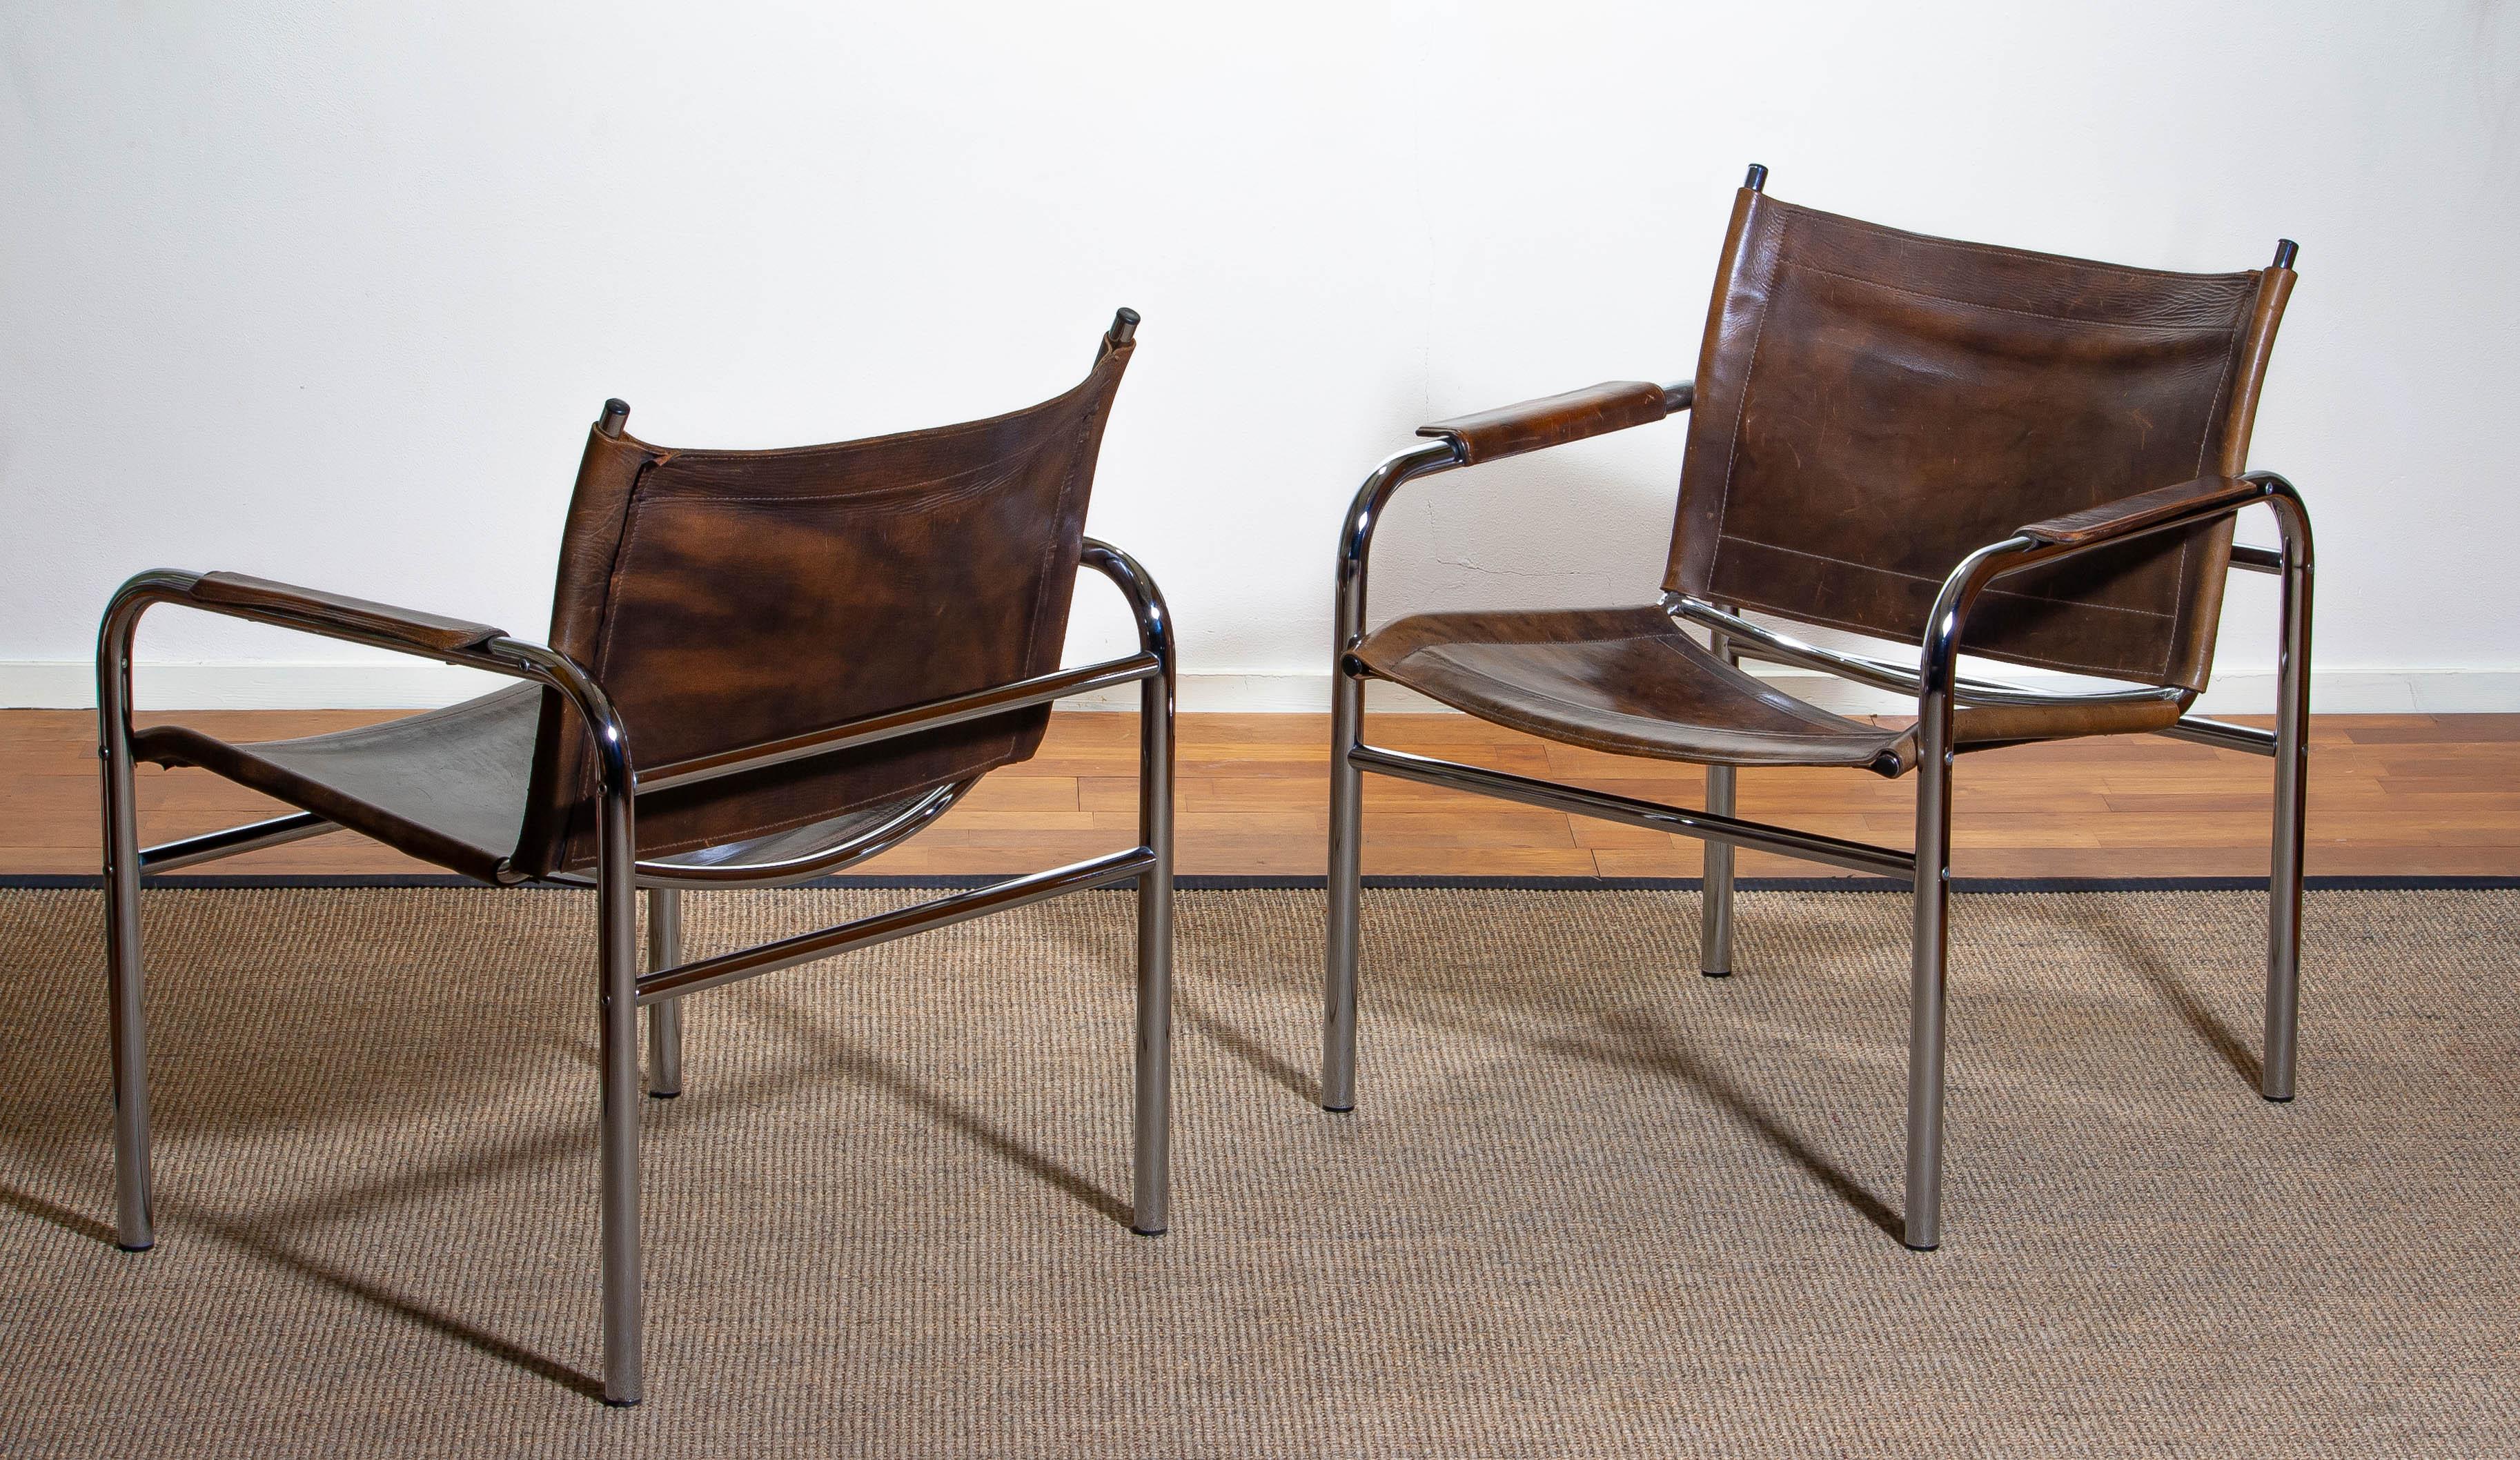 1980s, Pair of Leather and Tubular Steel Armchairs by Tord Björklund, Sweden 1